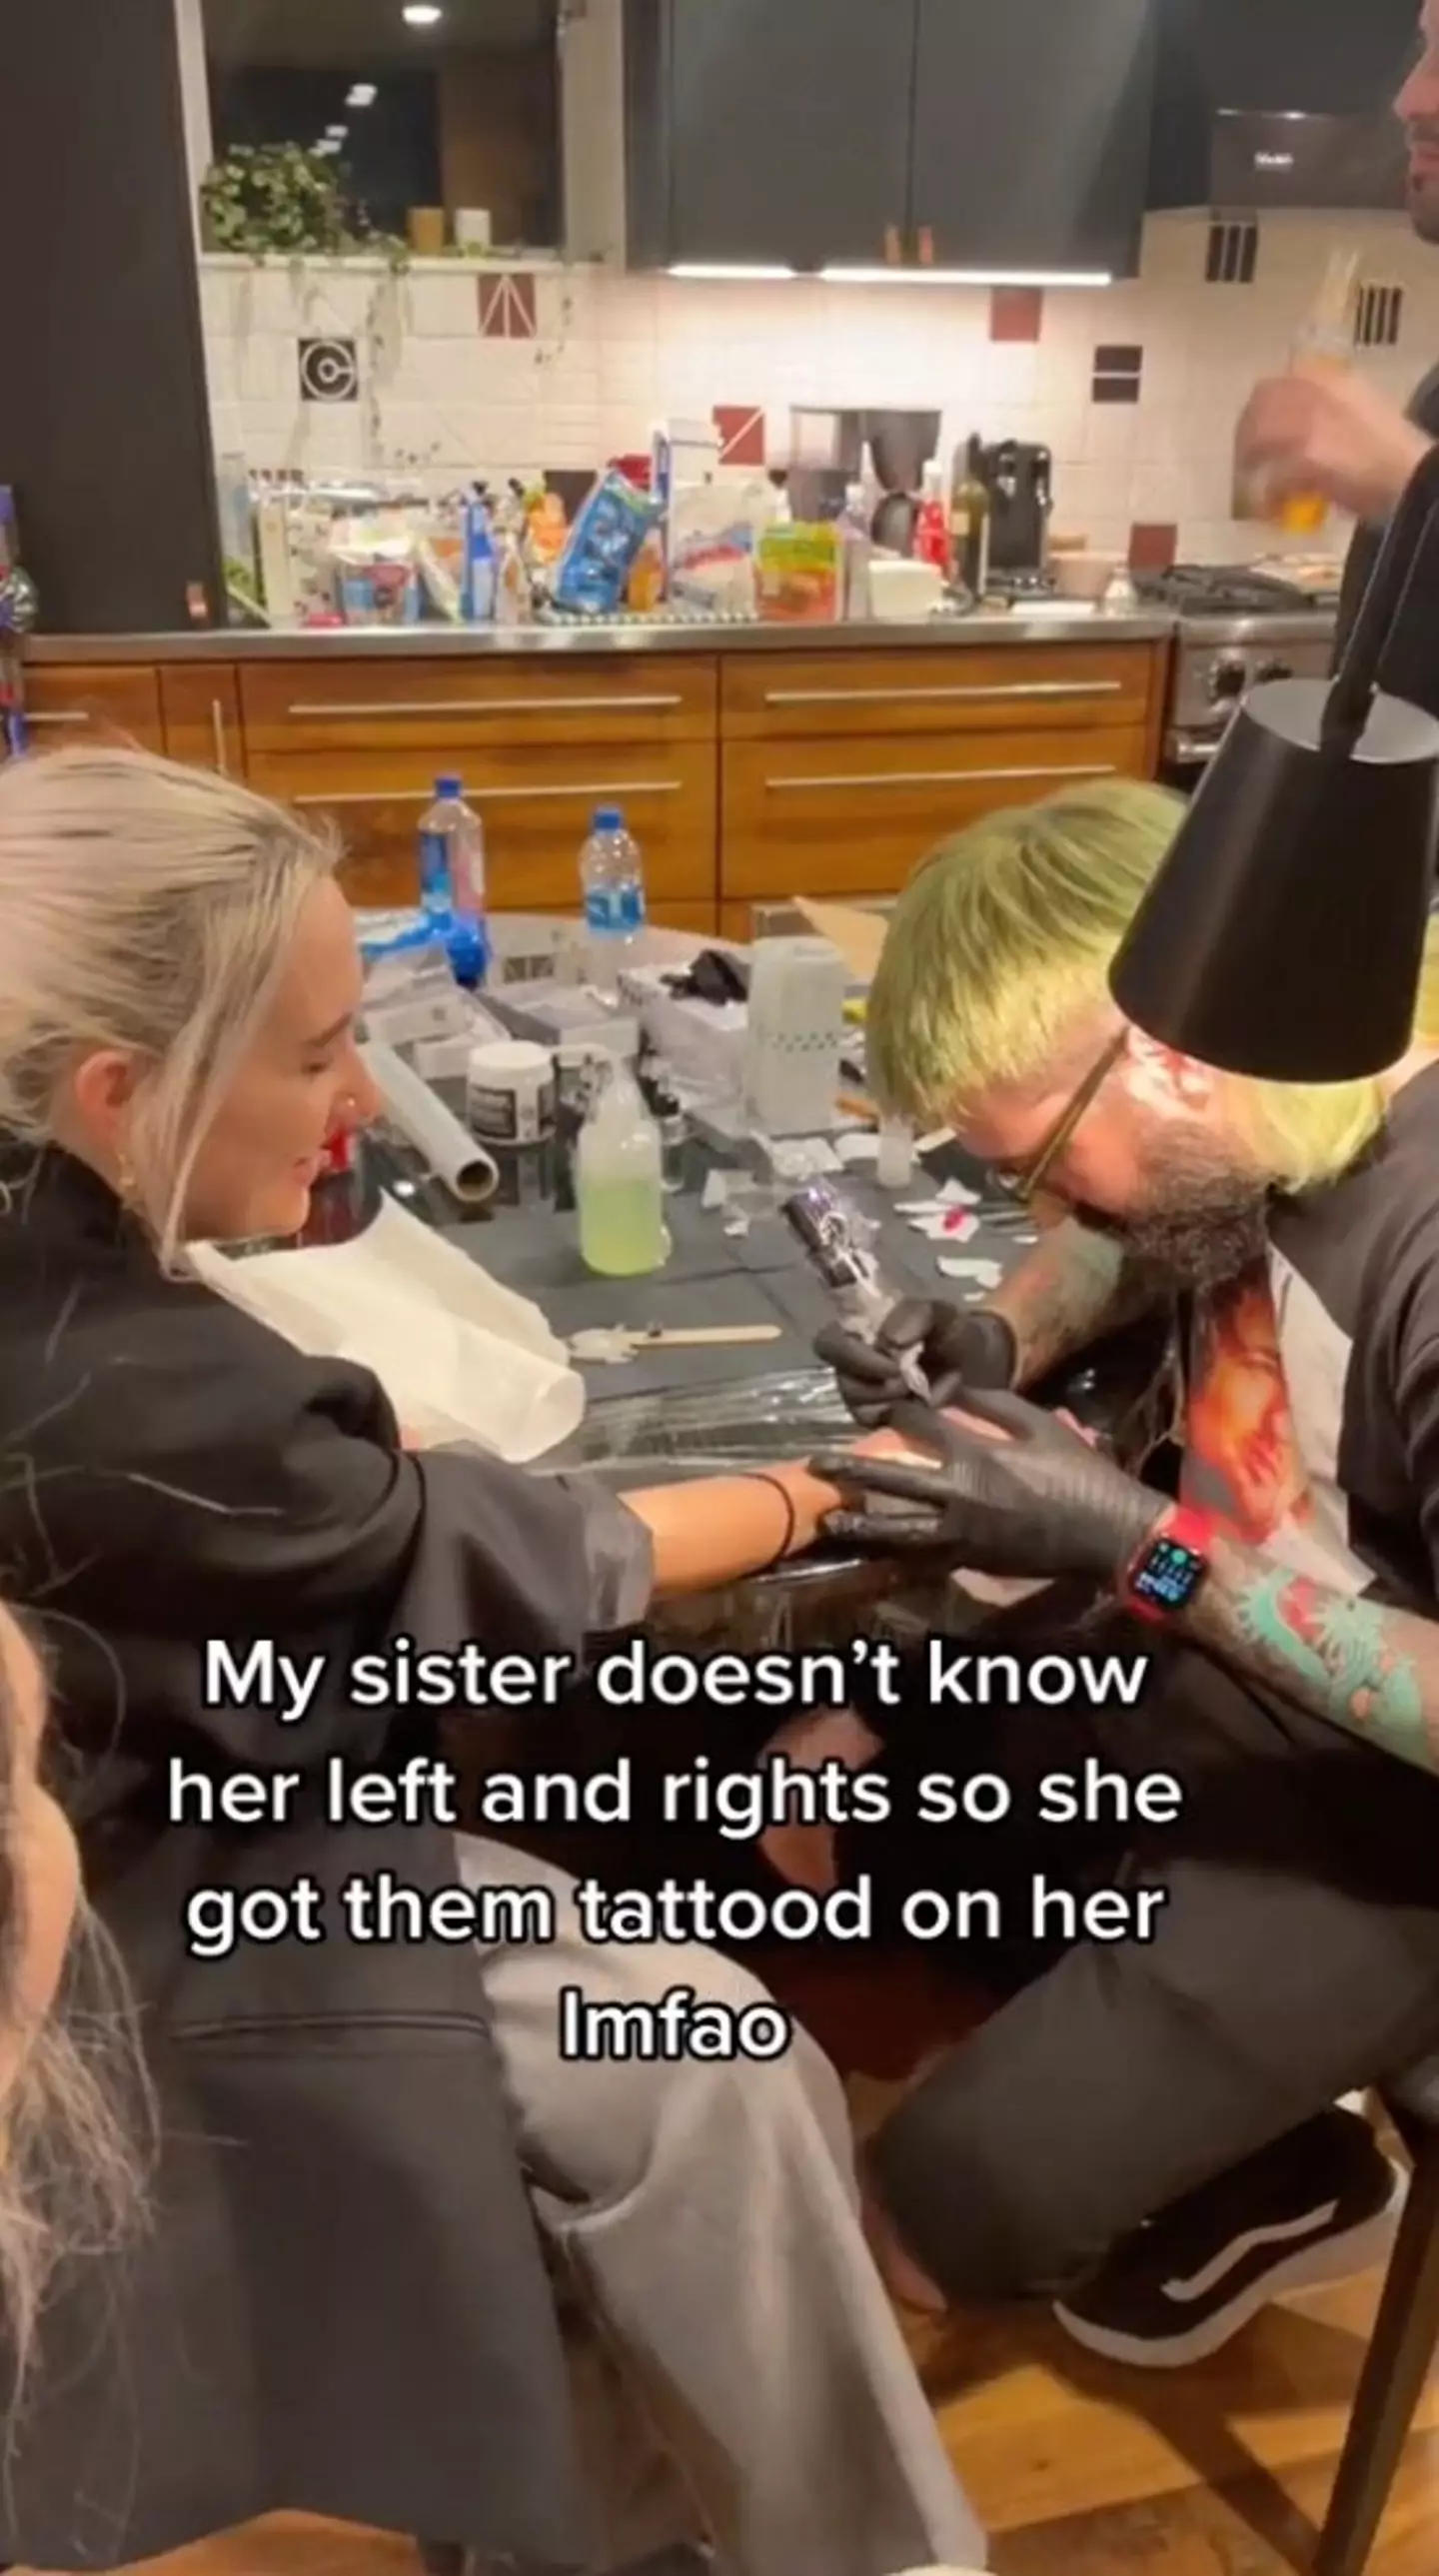 Part of the tattooing process was shared on TikTok.